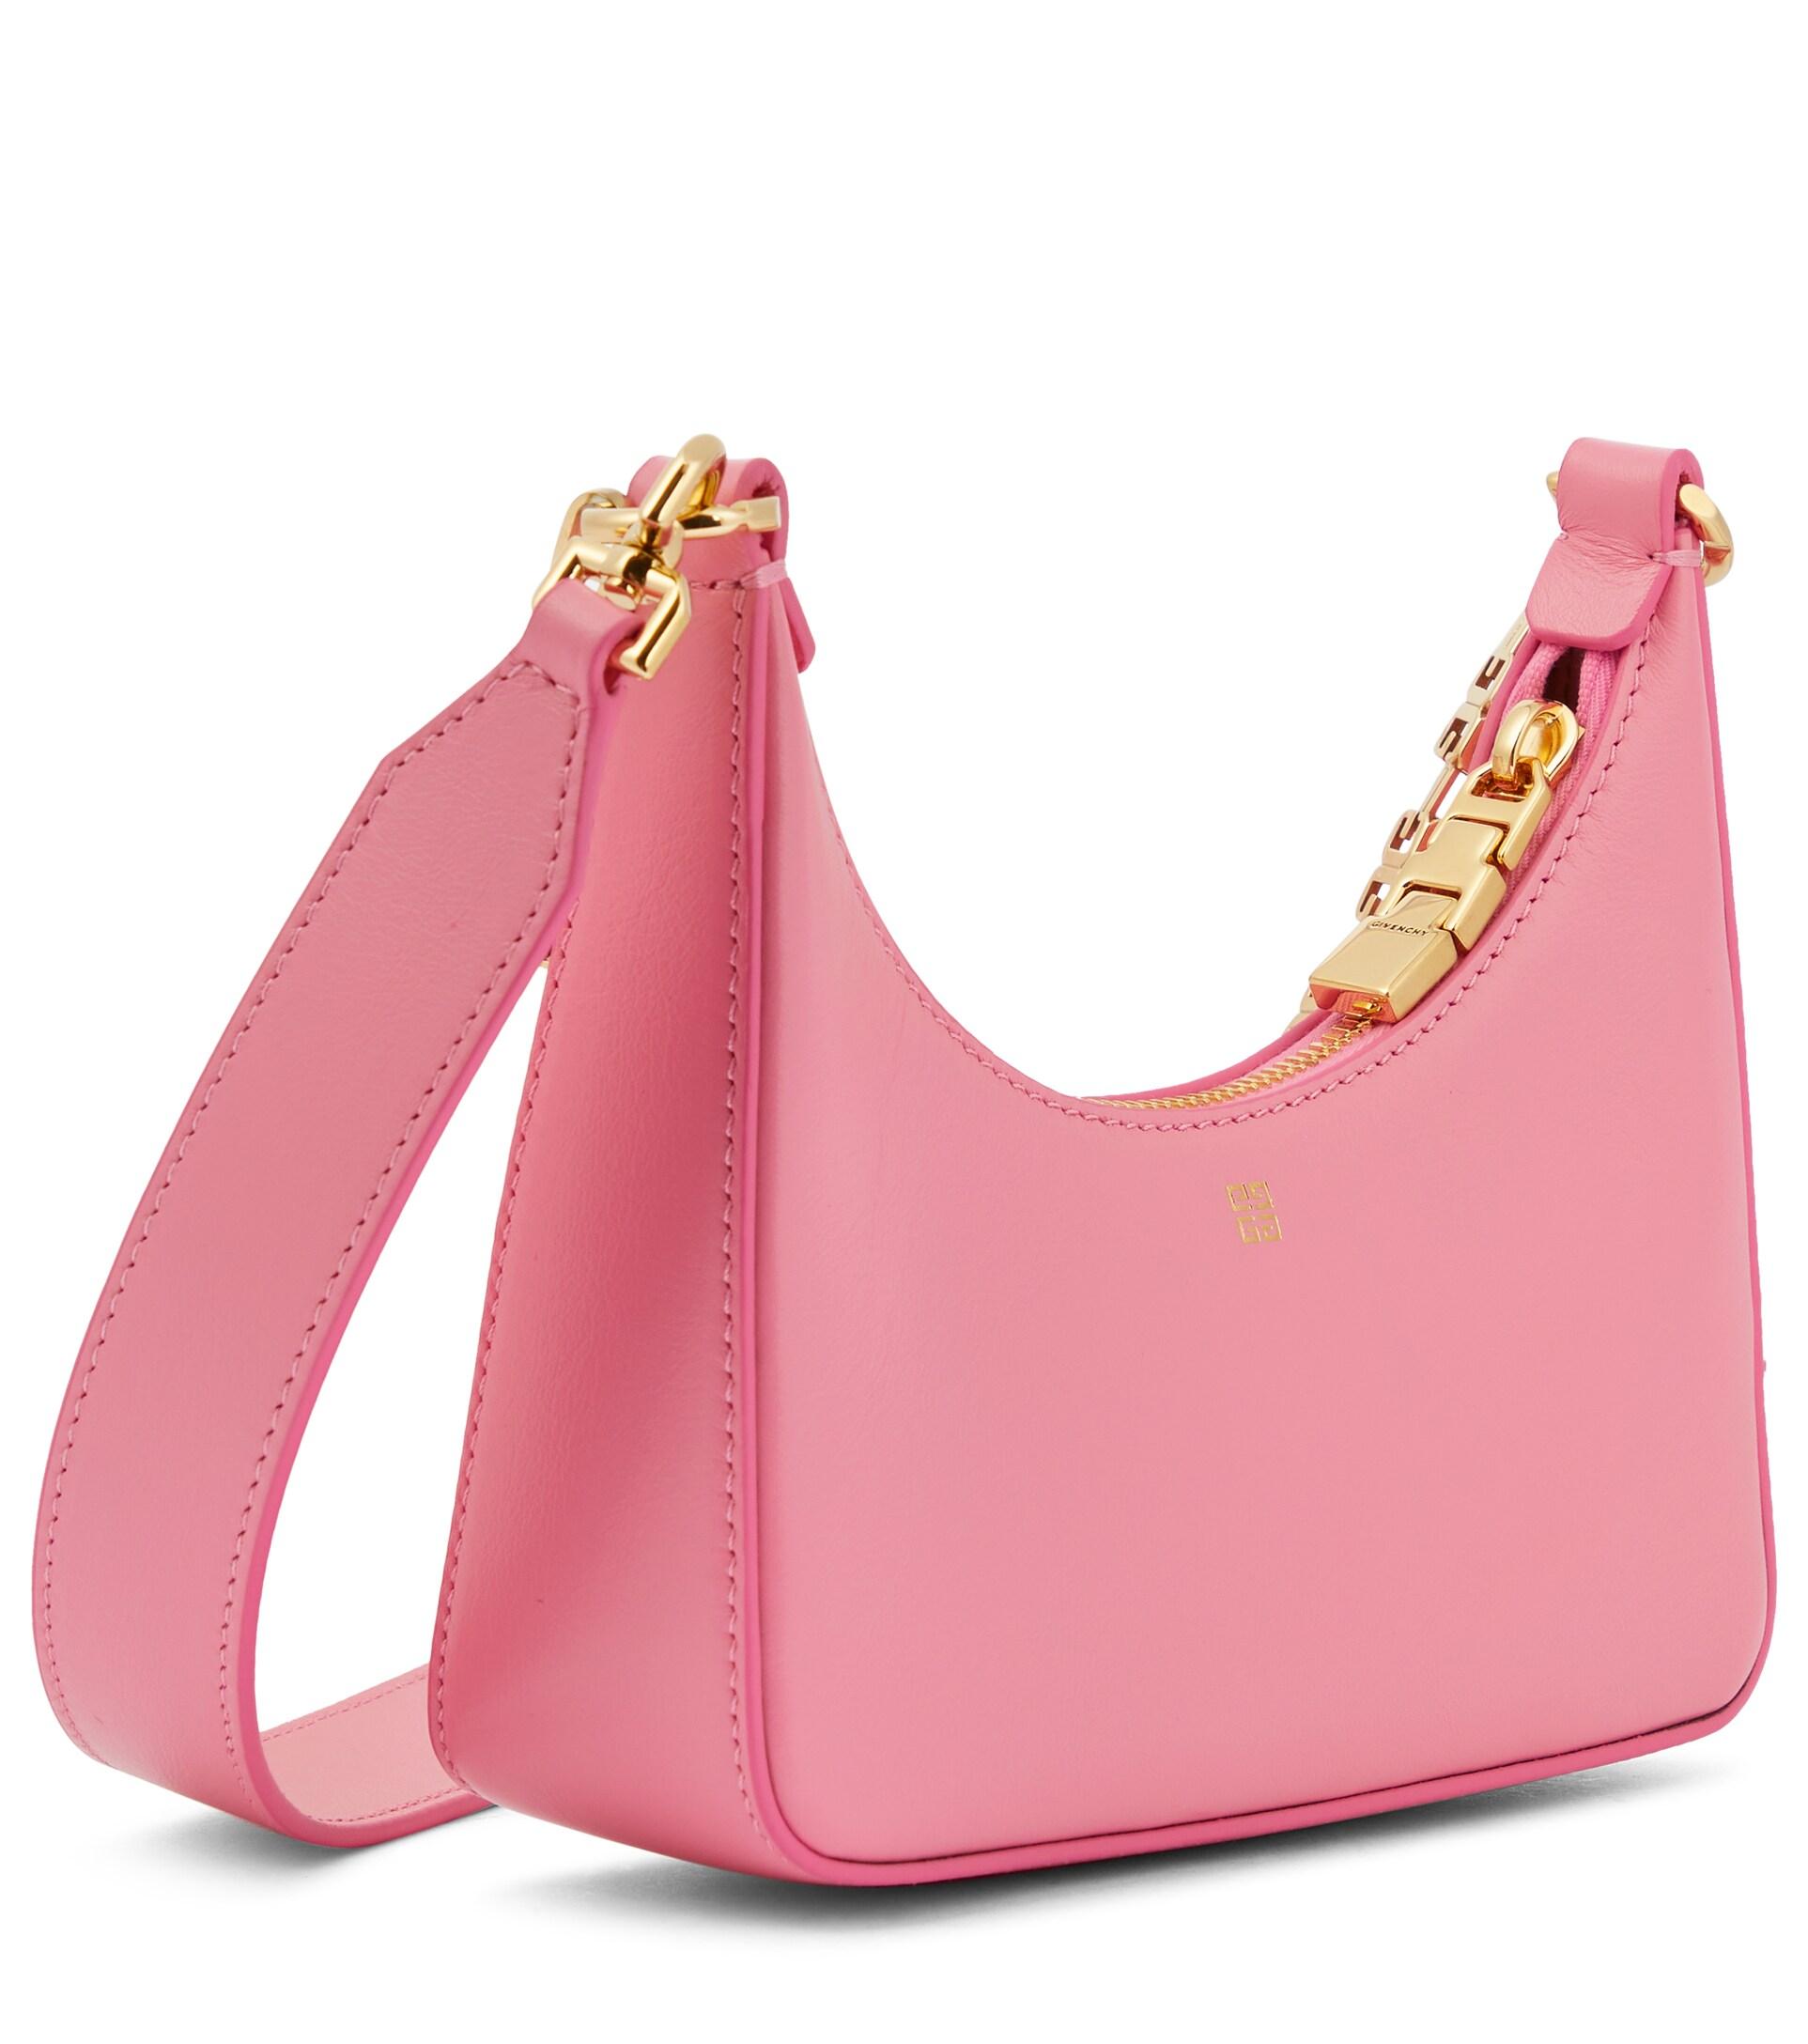 Givenchy Moon Cut Out Mini Leather Shoulder Bag in Pink | Lyst